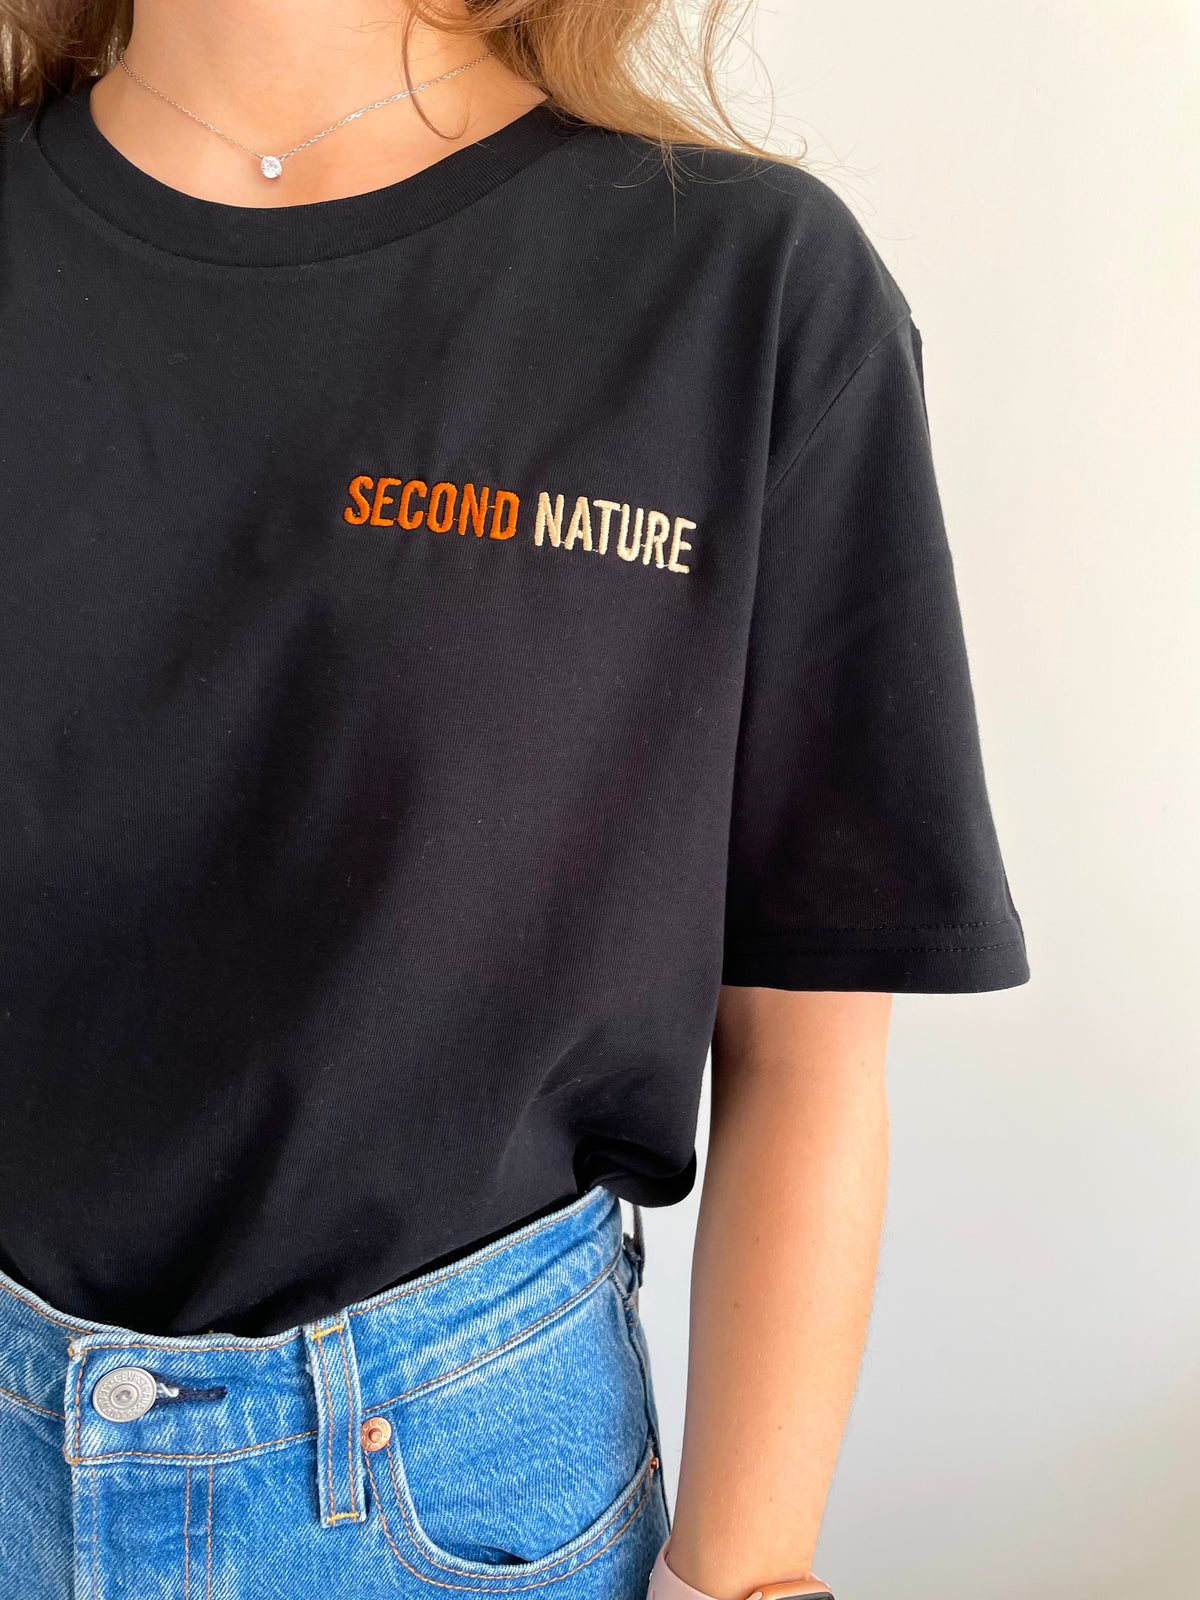 Second Nature Black T-shirt made from 100% Organic Cotton